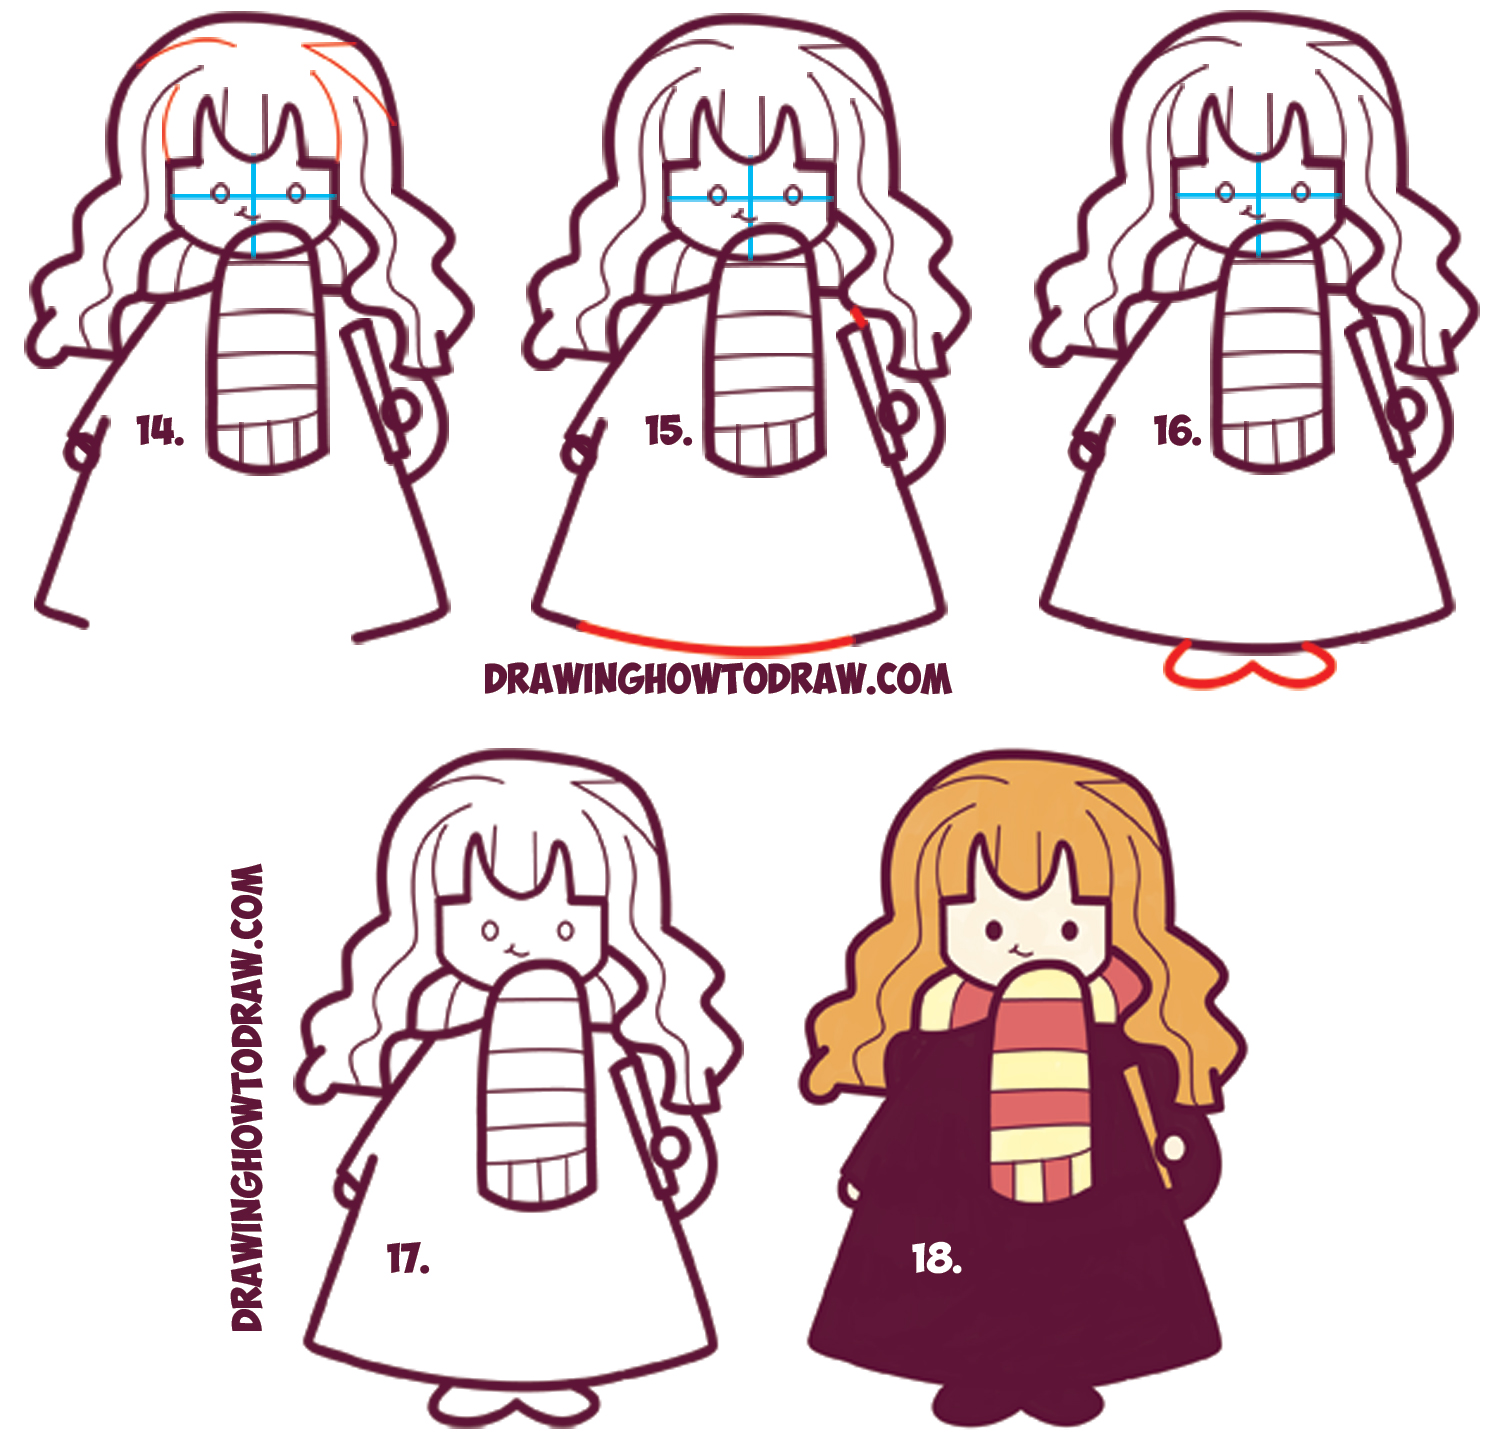 How to Draw Cute Hermione from Harry Potter (Chibi / Kawaii) Easy Steps